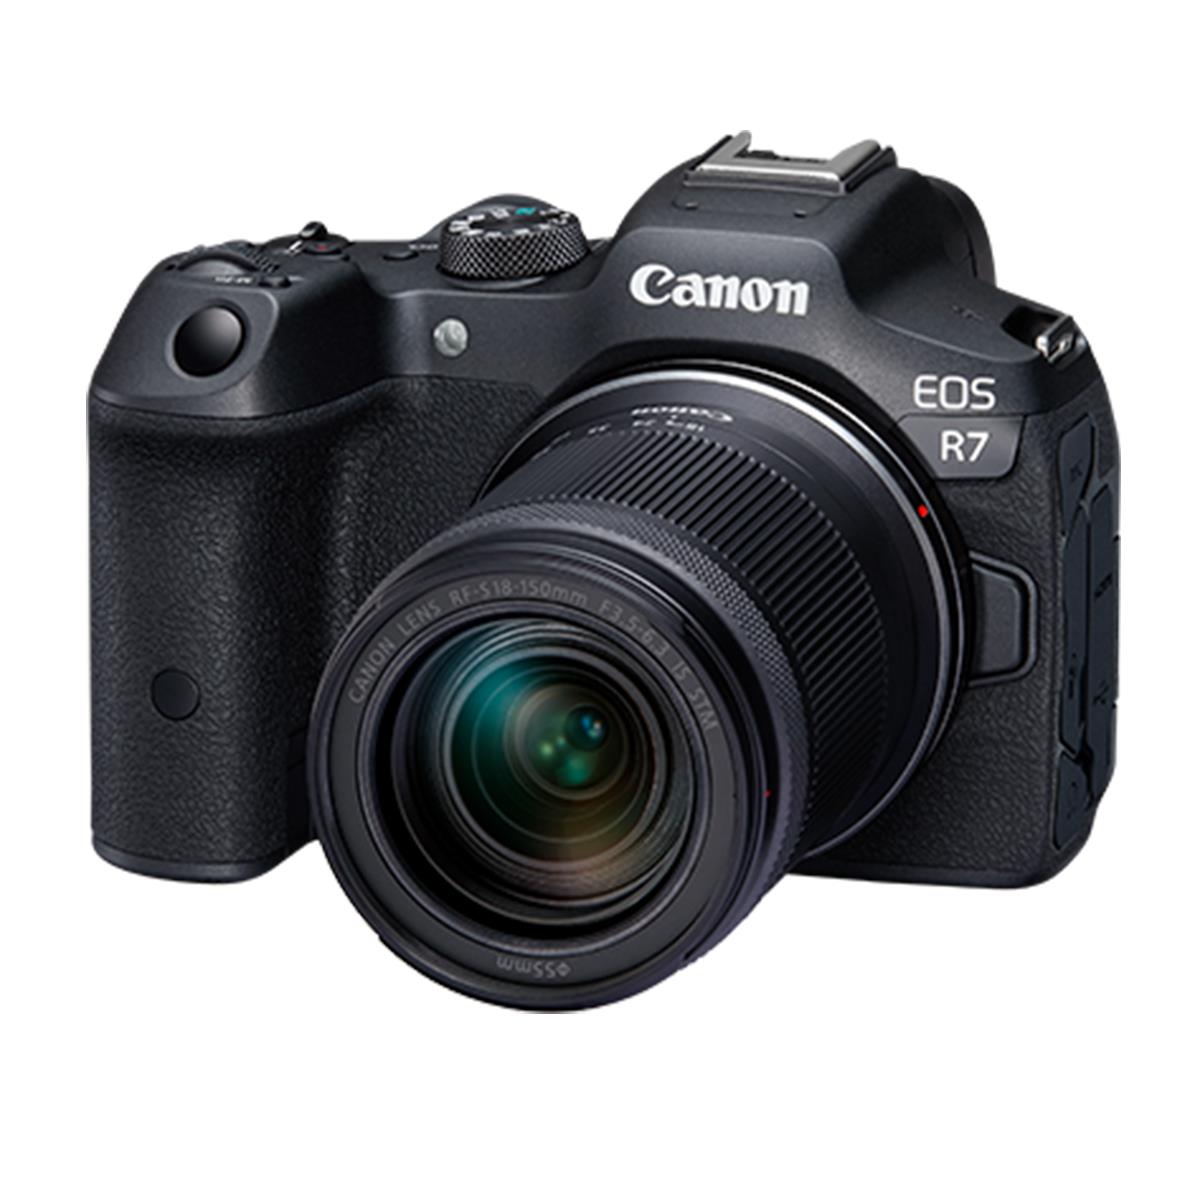 Image of Canon EOS R7 Mirrorless Digital Camera with RF-S 18-150mm f/3.5-6.3 IS STM Lens